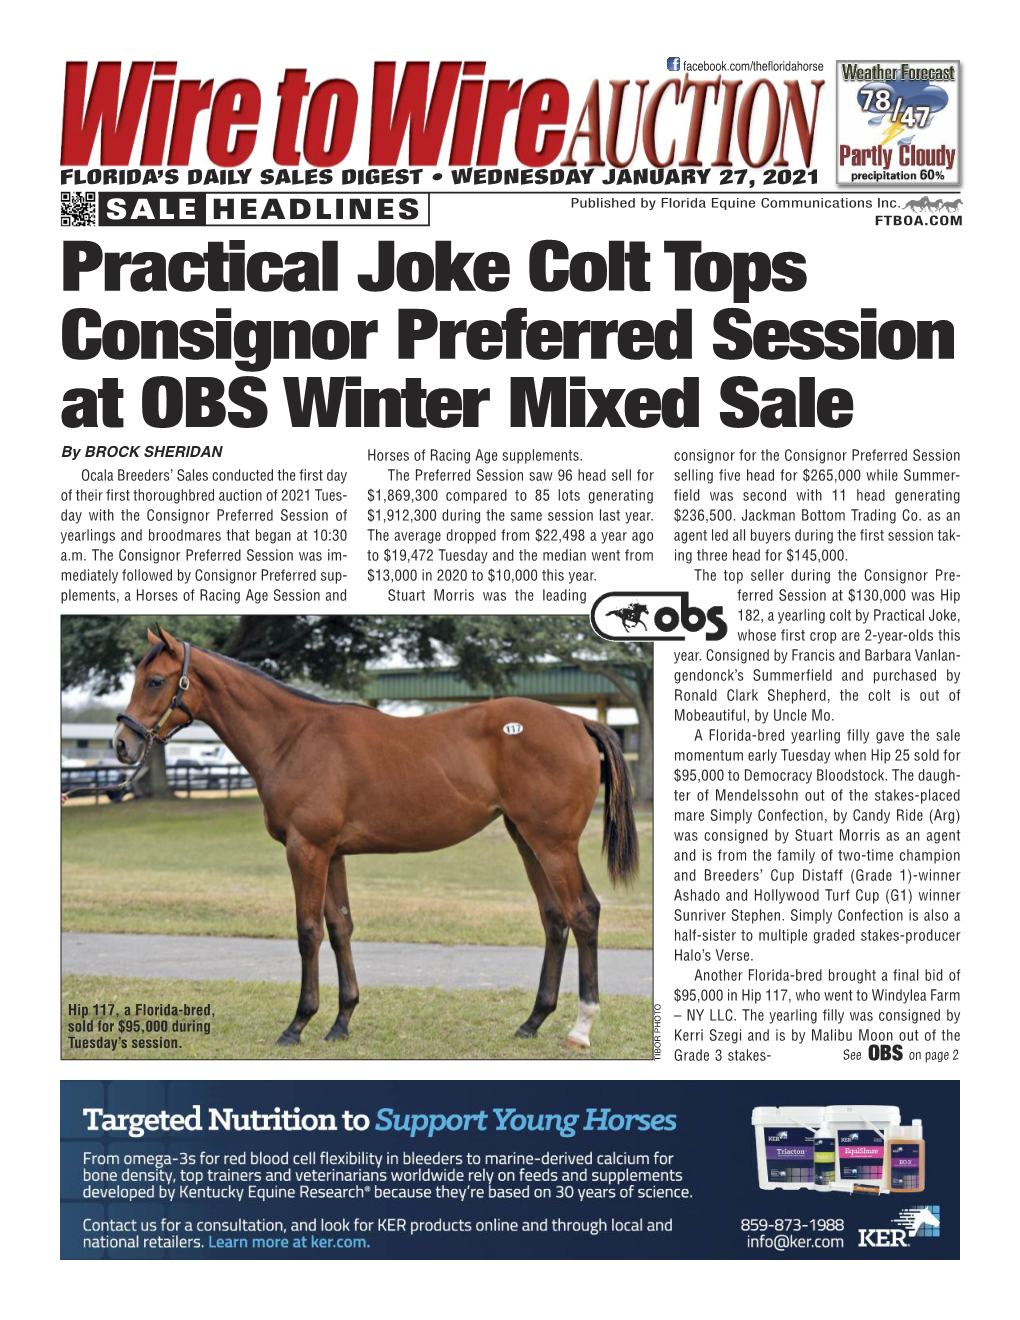 Practical Joke Colt Tops Consignor Preferred Session at OBS Winter Mixed Sale Horses of Racing Age Supplements